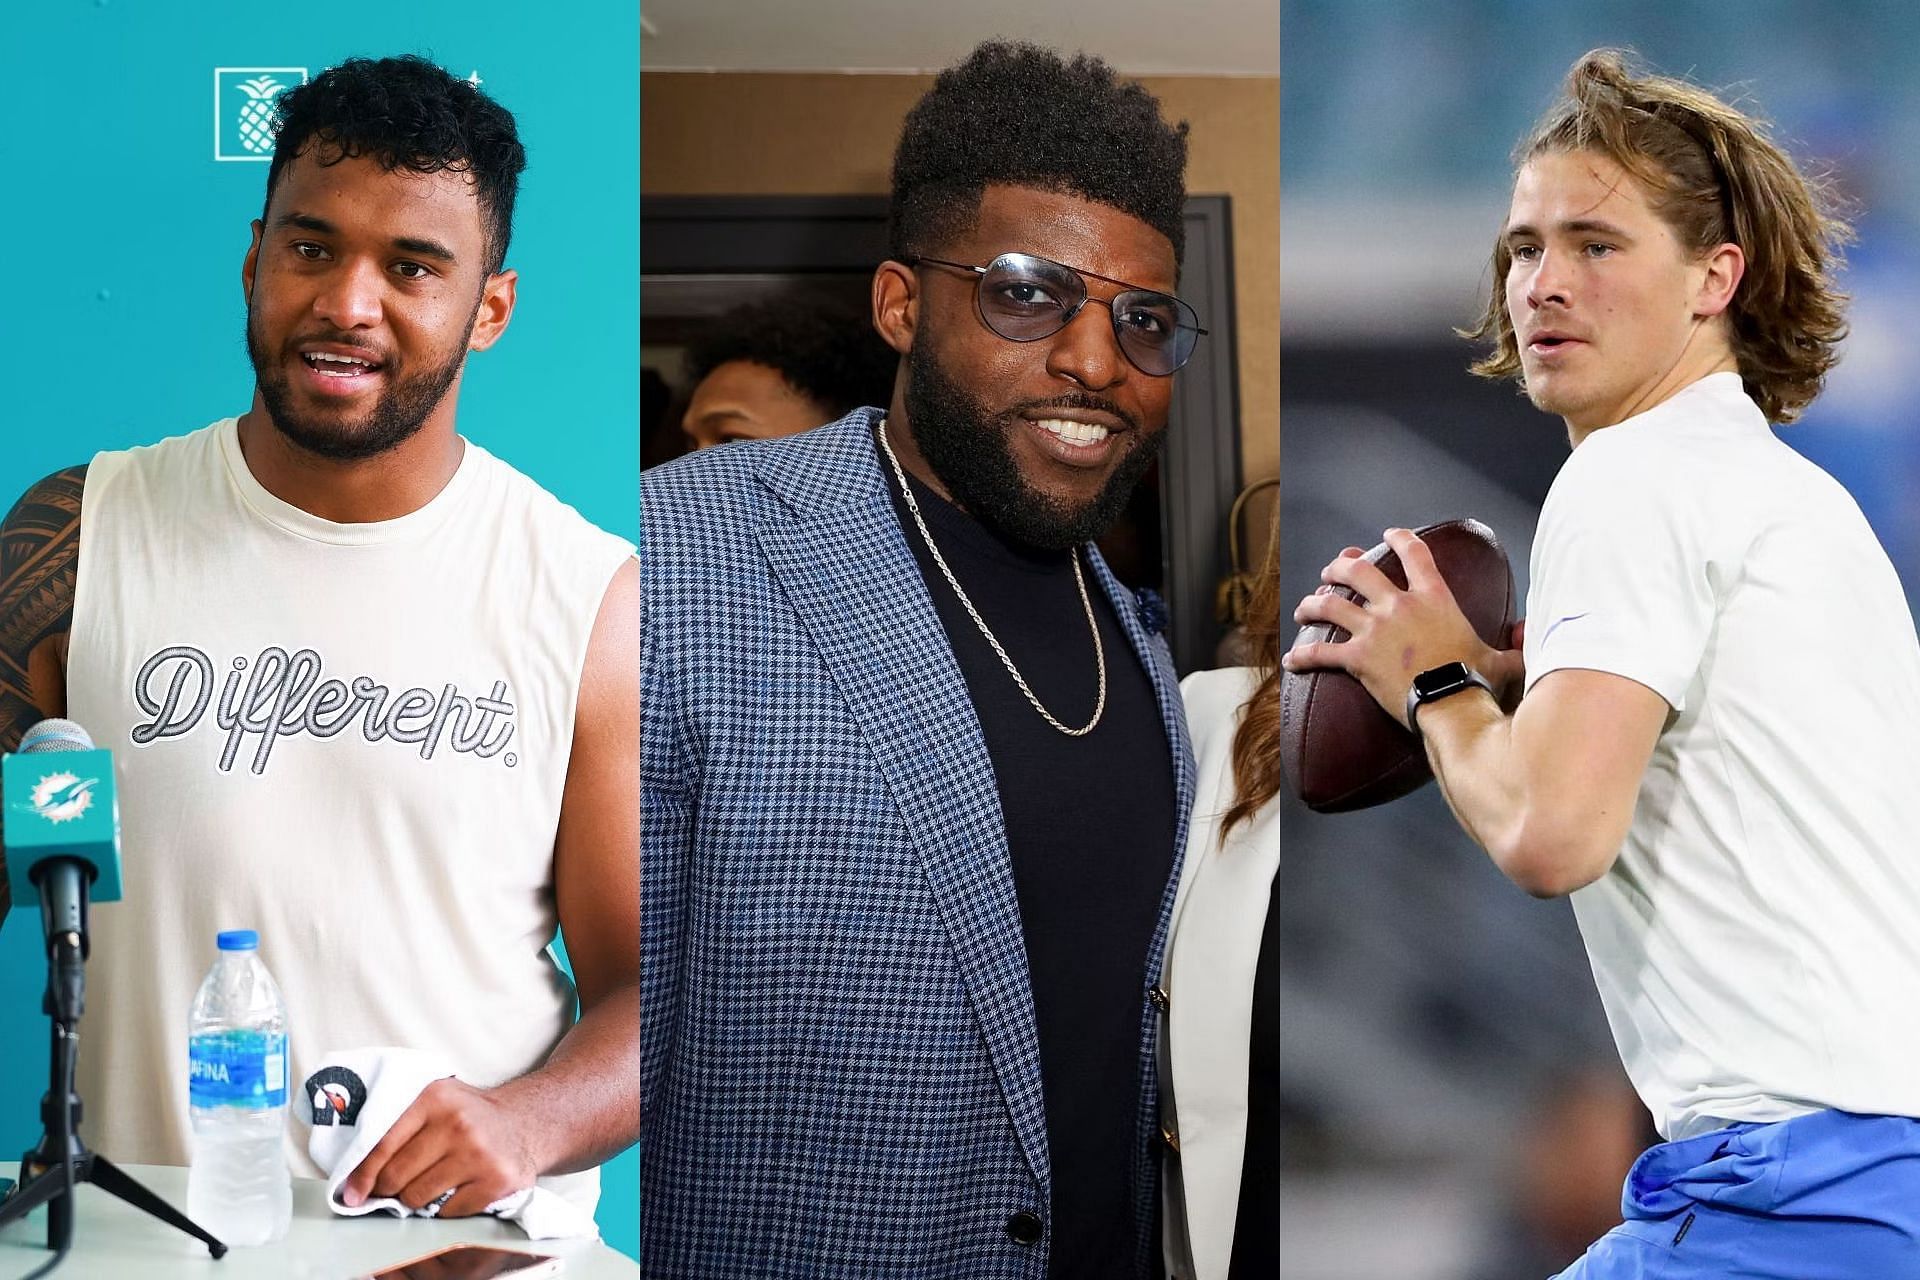 Emmanuel Acho takes shots at Justin Herbert after Chargers QB loses to Tua Tagovailoa&rsquo;s Dolphins in thrilling encounter